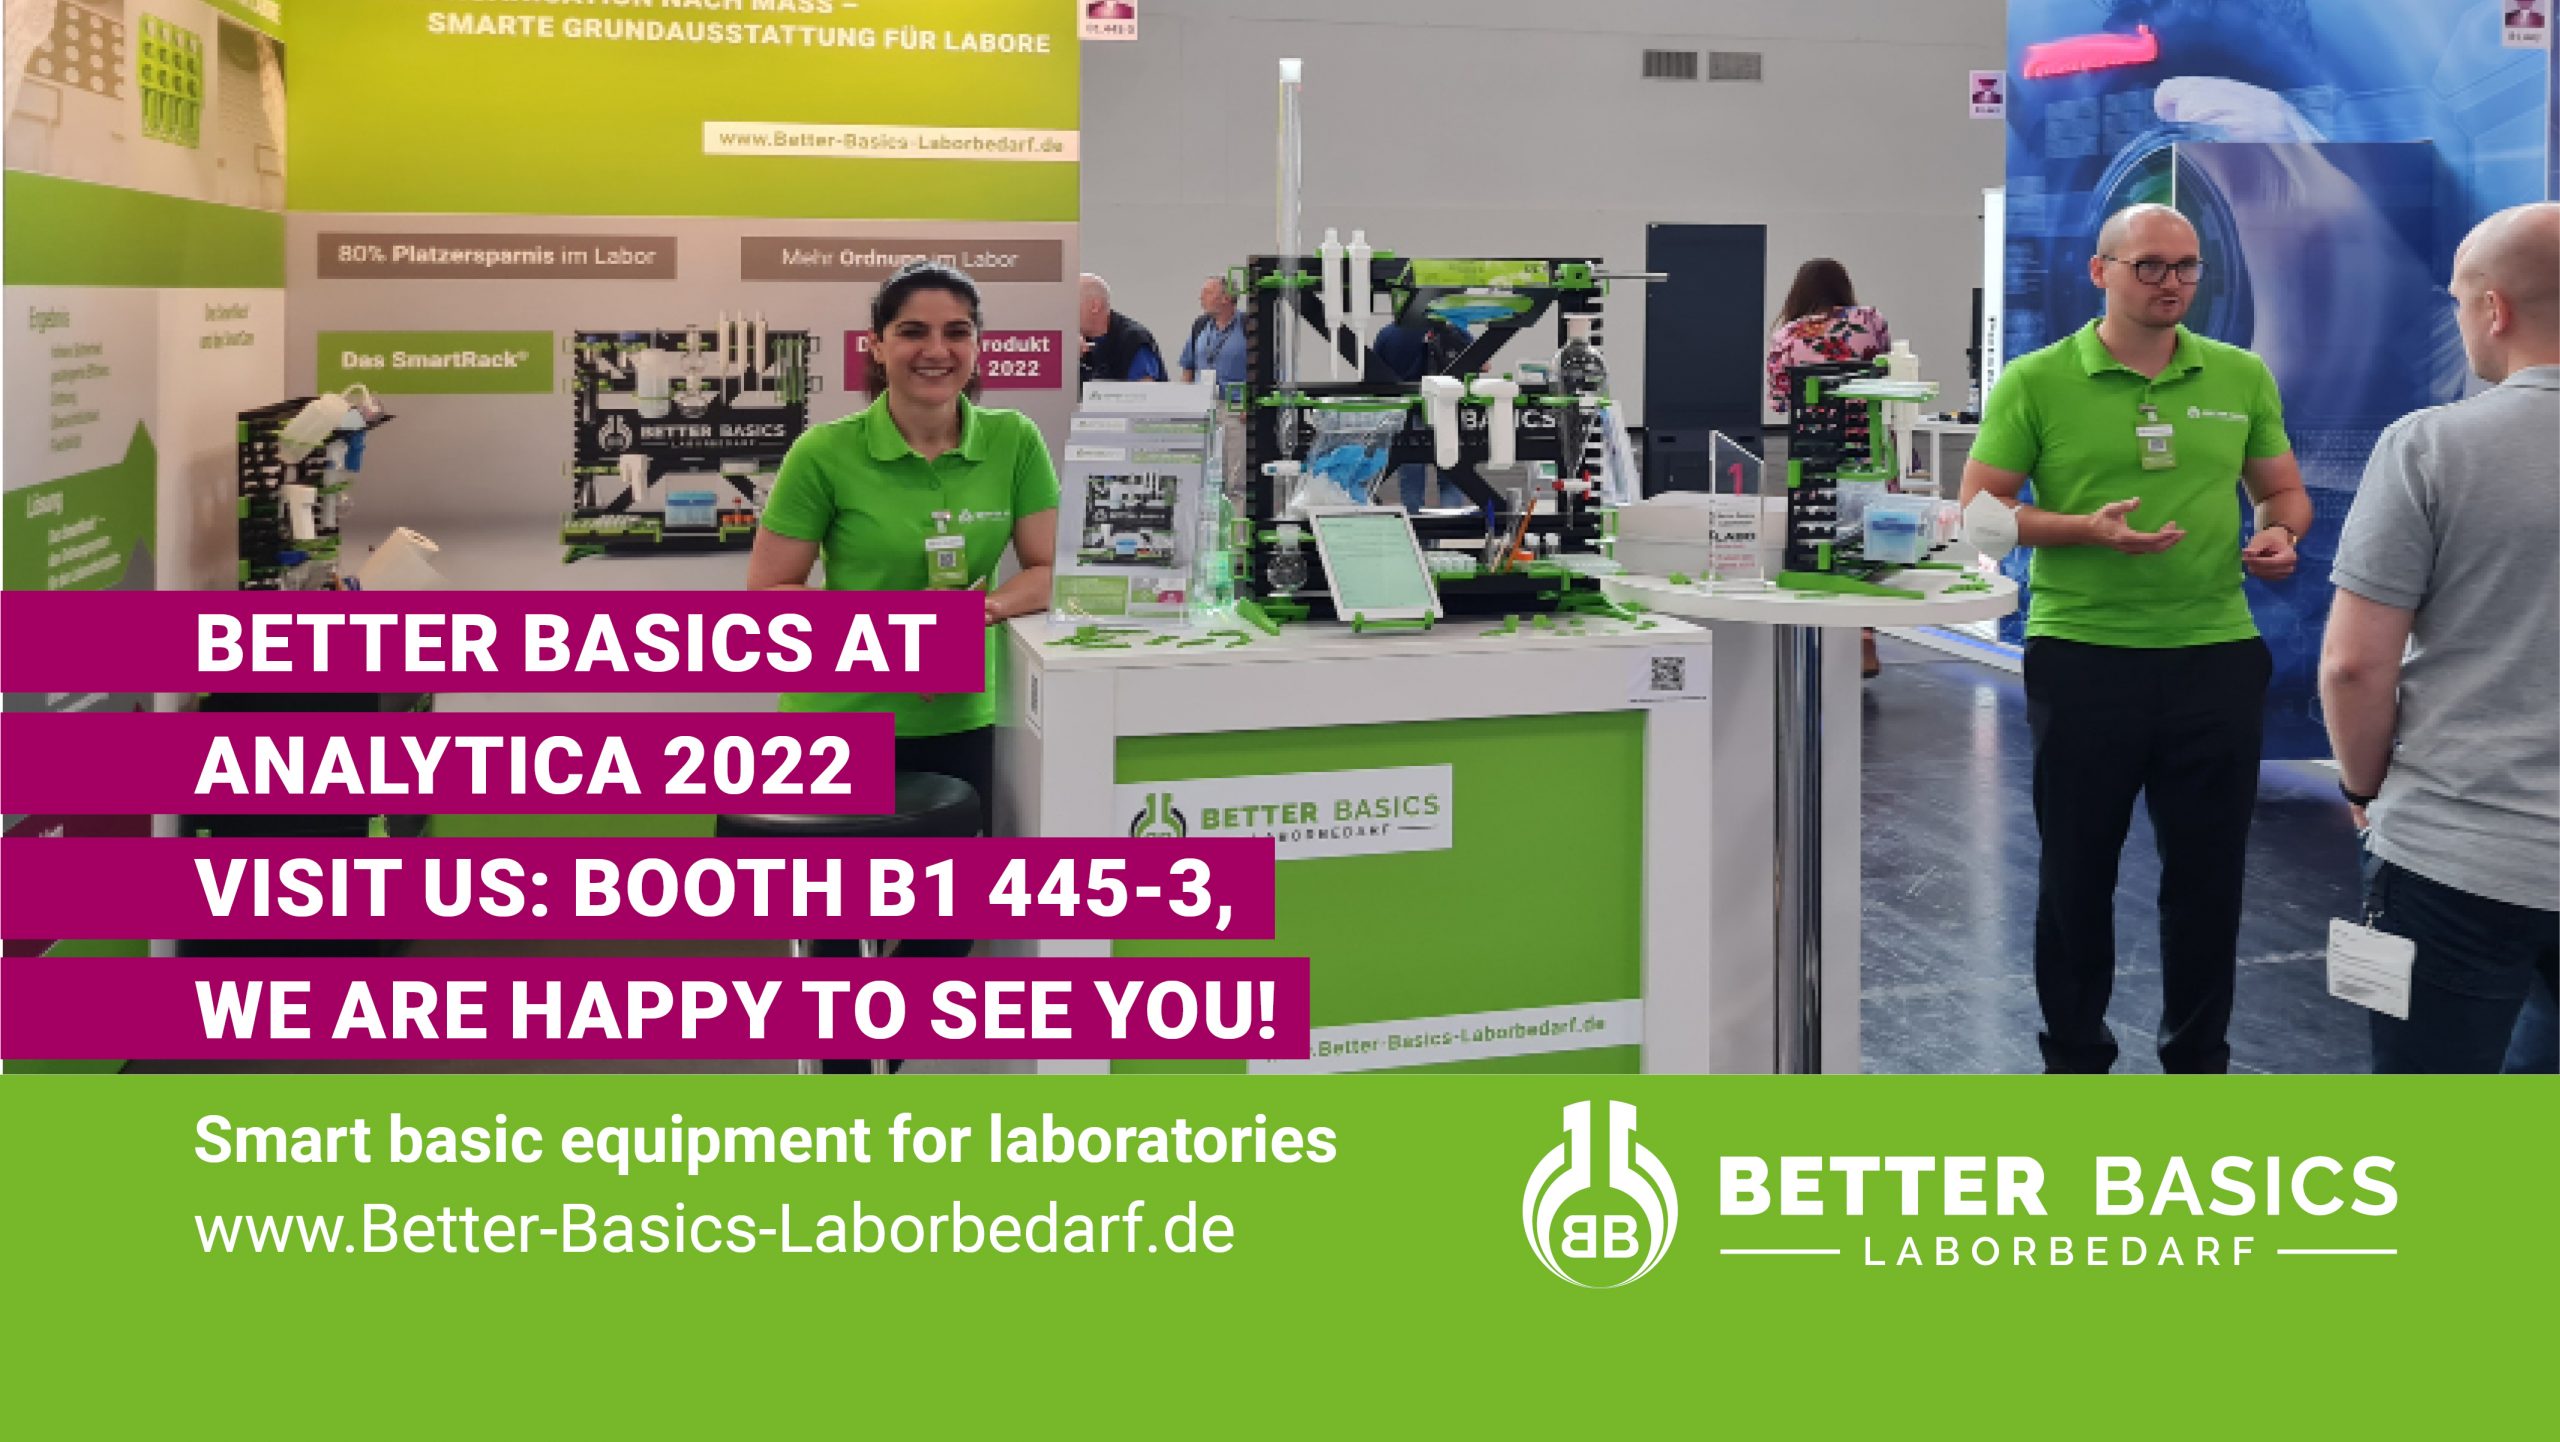 Better Basics Laborbedarf GmbH News Beitrag EN- Better Basics at Analytica 2022 visit us: booth B1 445-3, we are happy to see you!